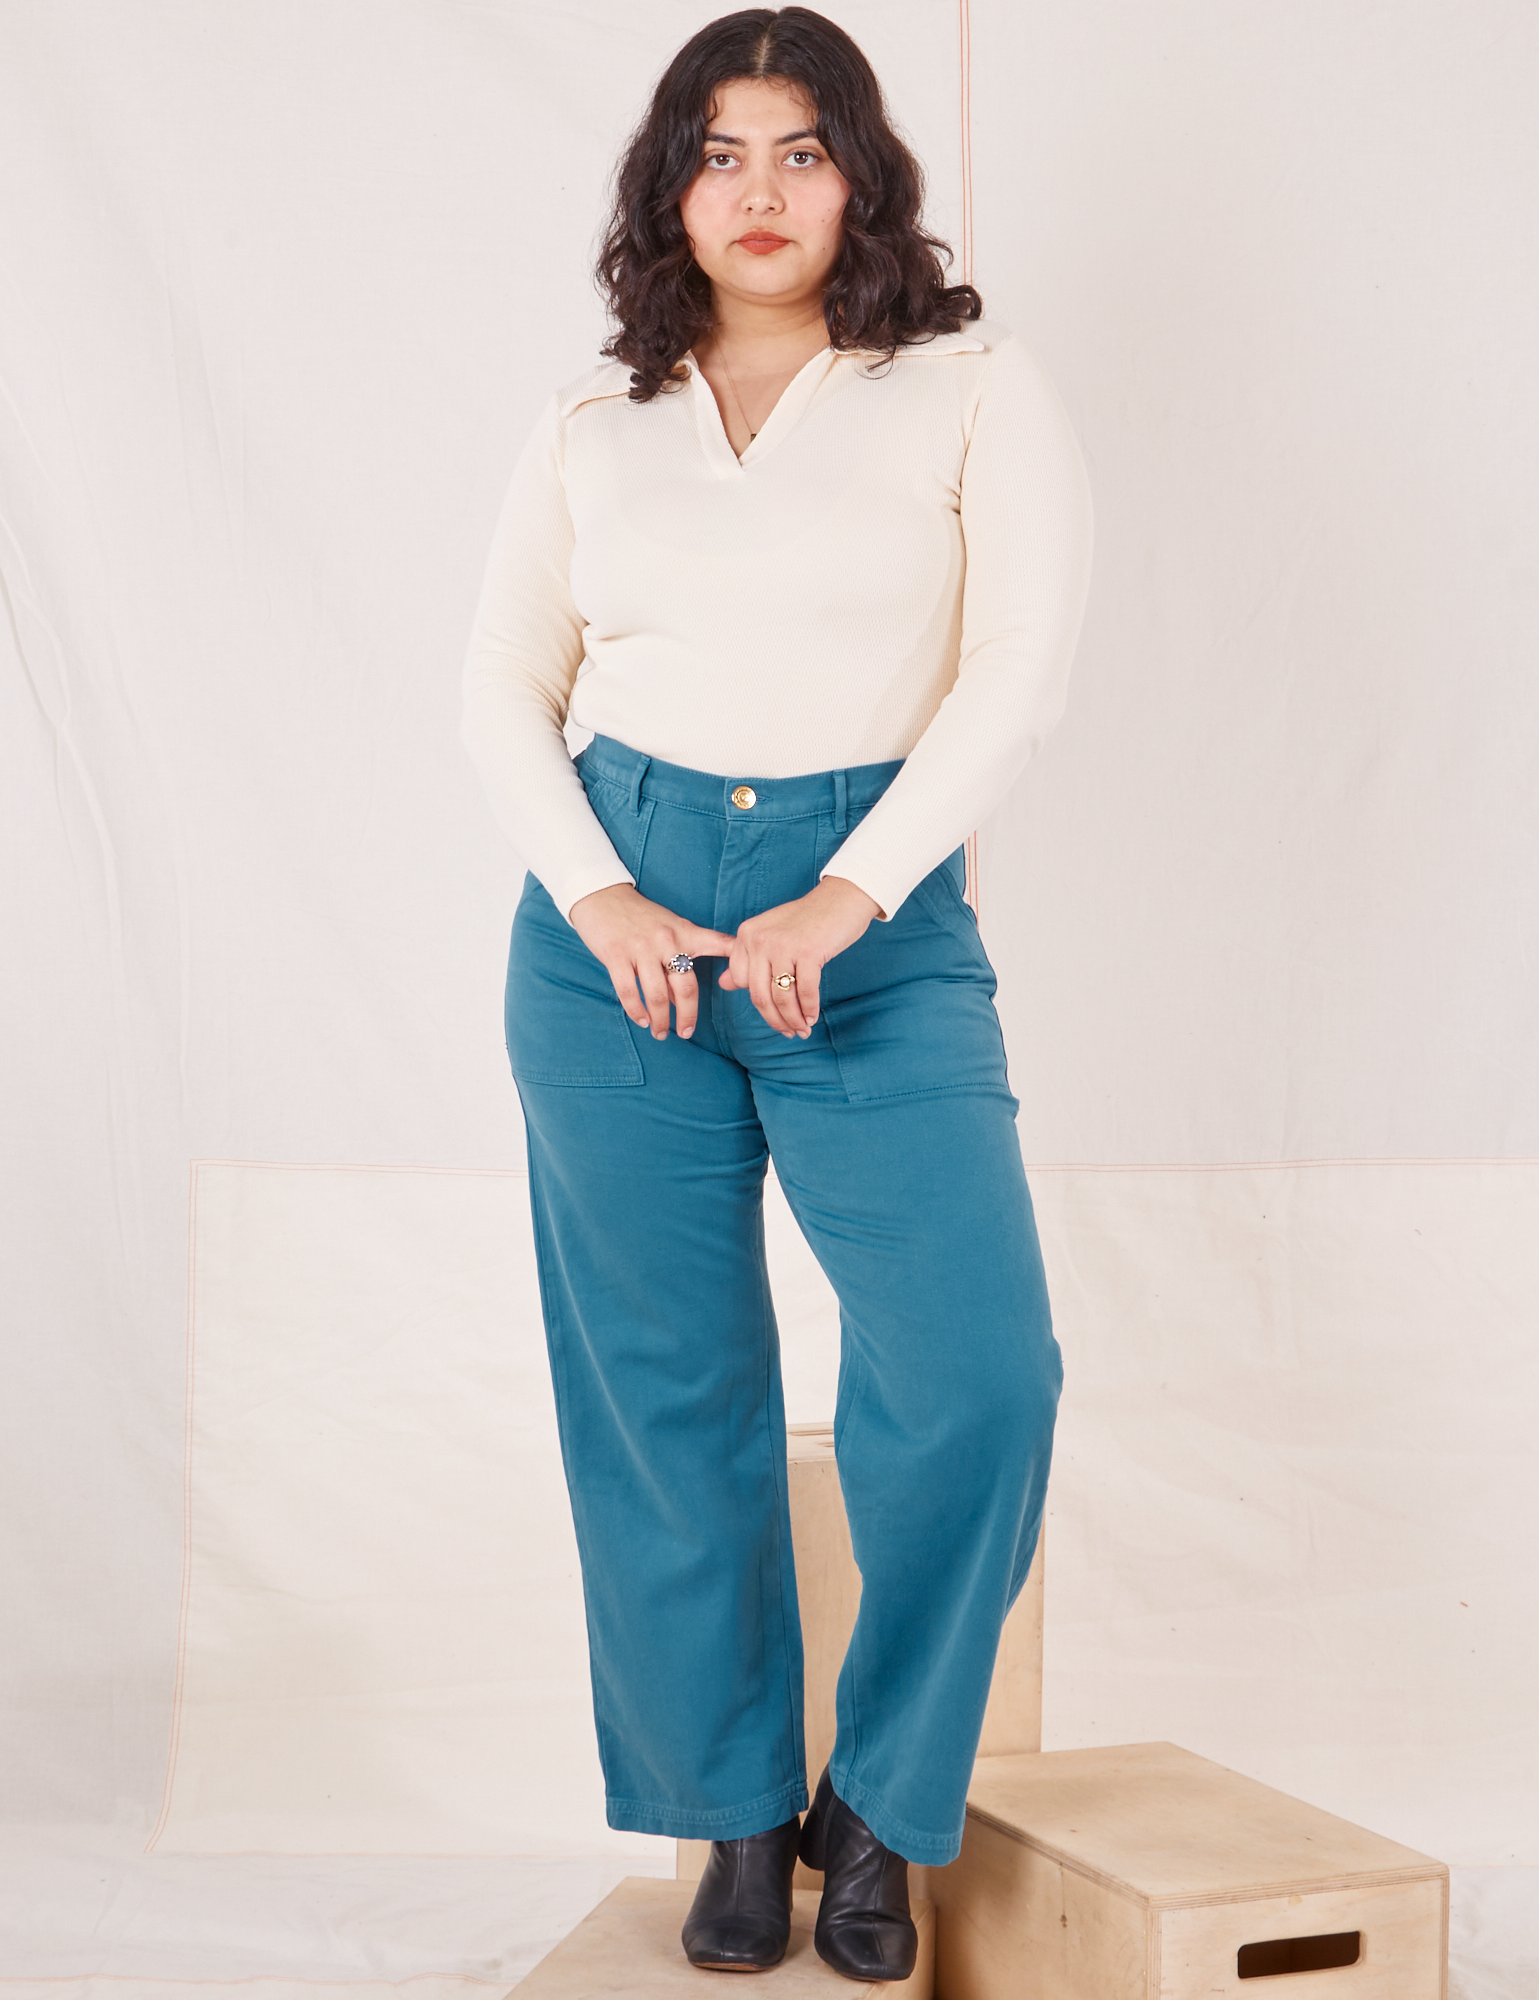 Melanie is 5&#39;6&quot; and wearing M Organic Work Pants in Marine Blue paired with vintage off-white Long Sleeve Fisherman Polo